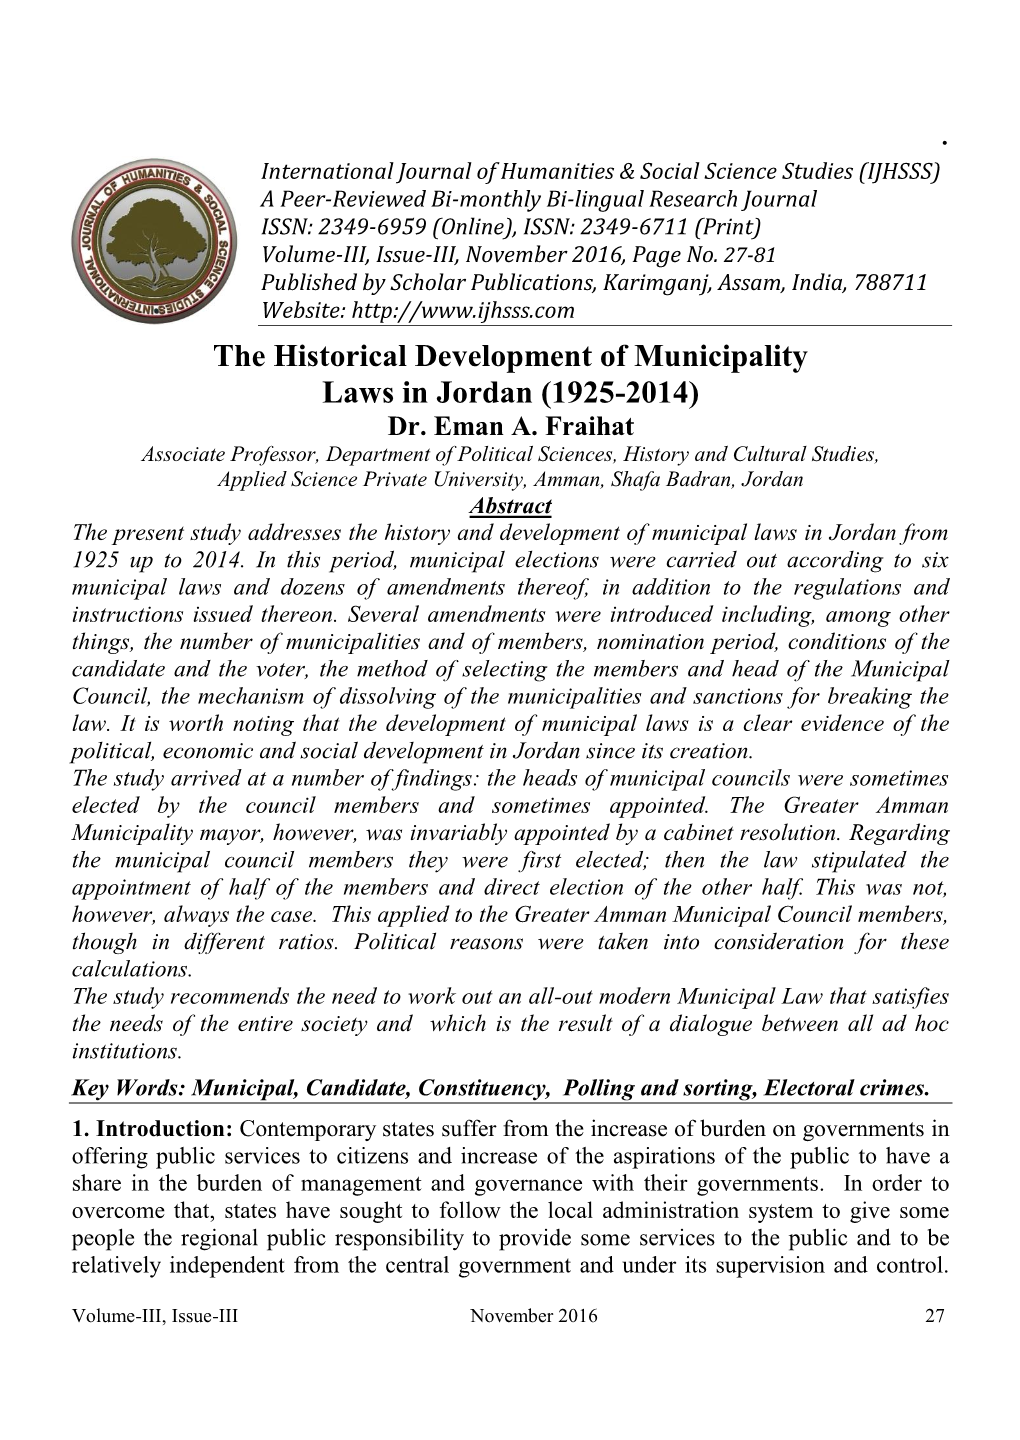 The Historical Development of Municipality Laws in Jordan (1925-2014) Dr